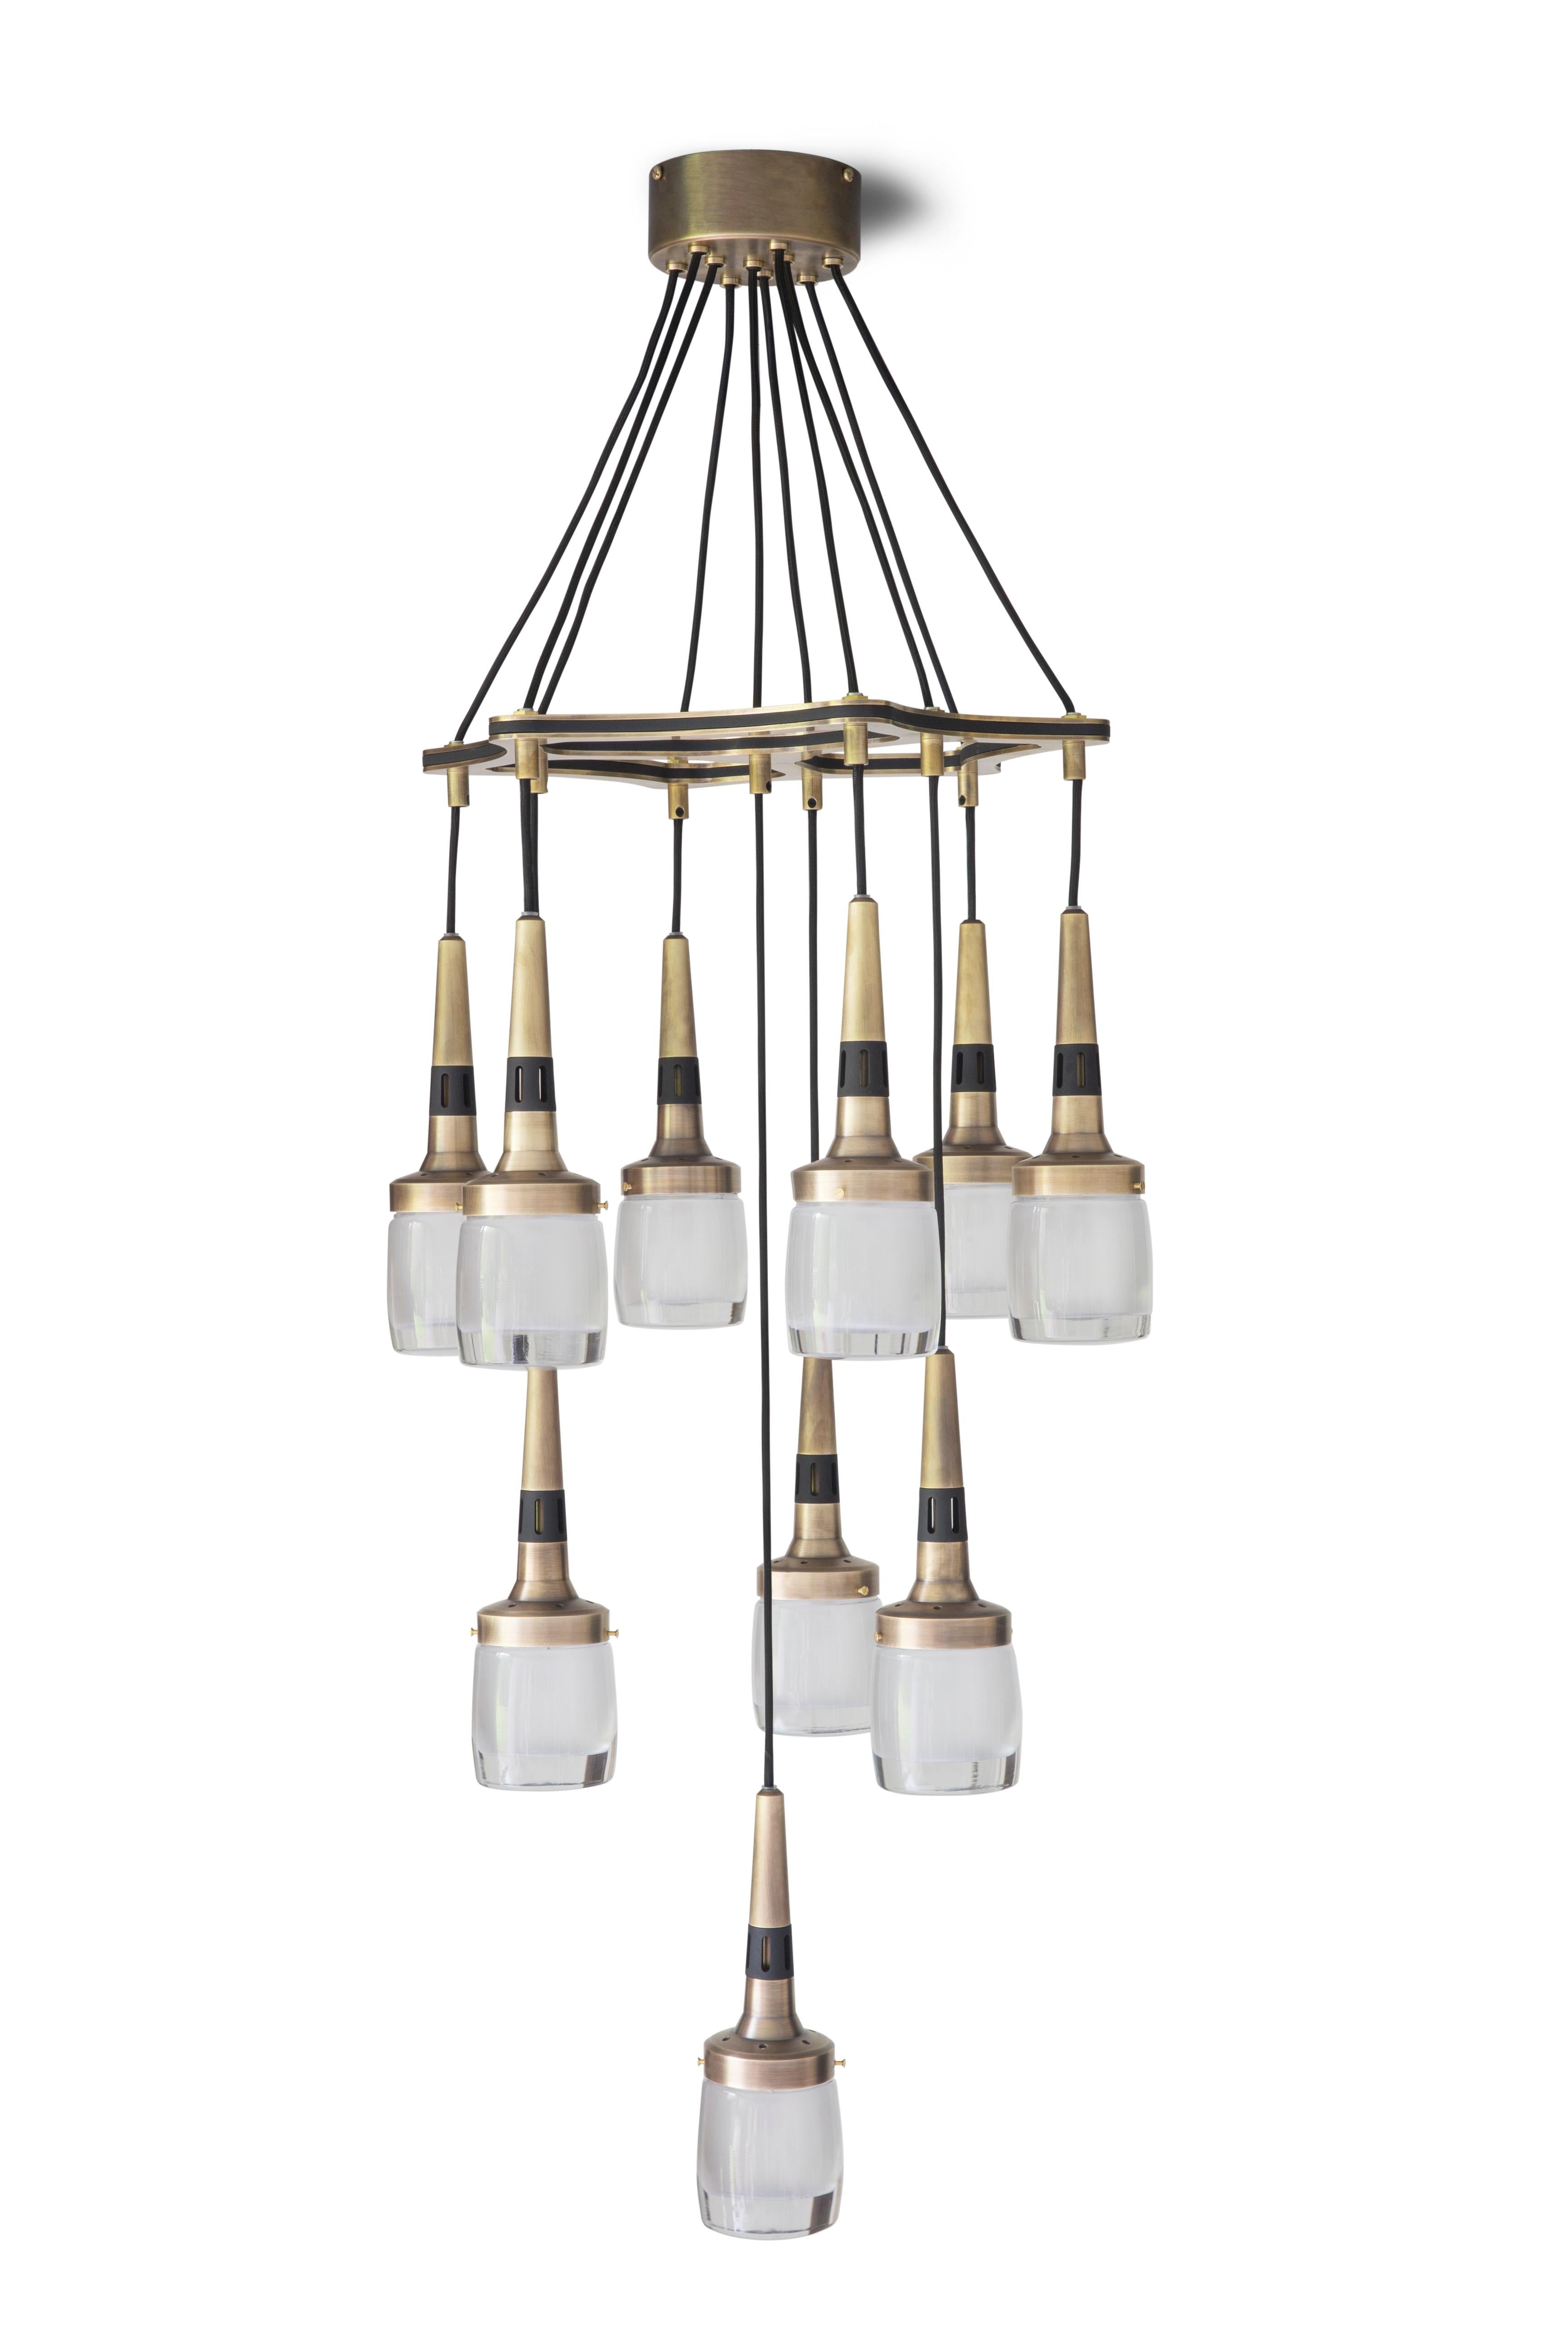 Flagon chandelier 10 by Bert Frank
Dimensions: 80-200 x 40 x 11.6 cm
Materials: Brass, steel

Brushed Brass lacquered as standard, custom finishes available
All our lamps can be wired according to each country. If sold to the USA it will be wired